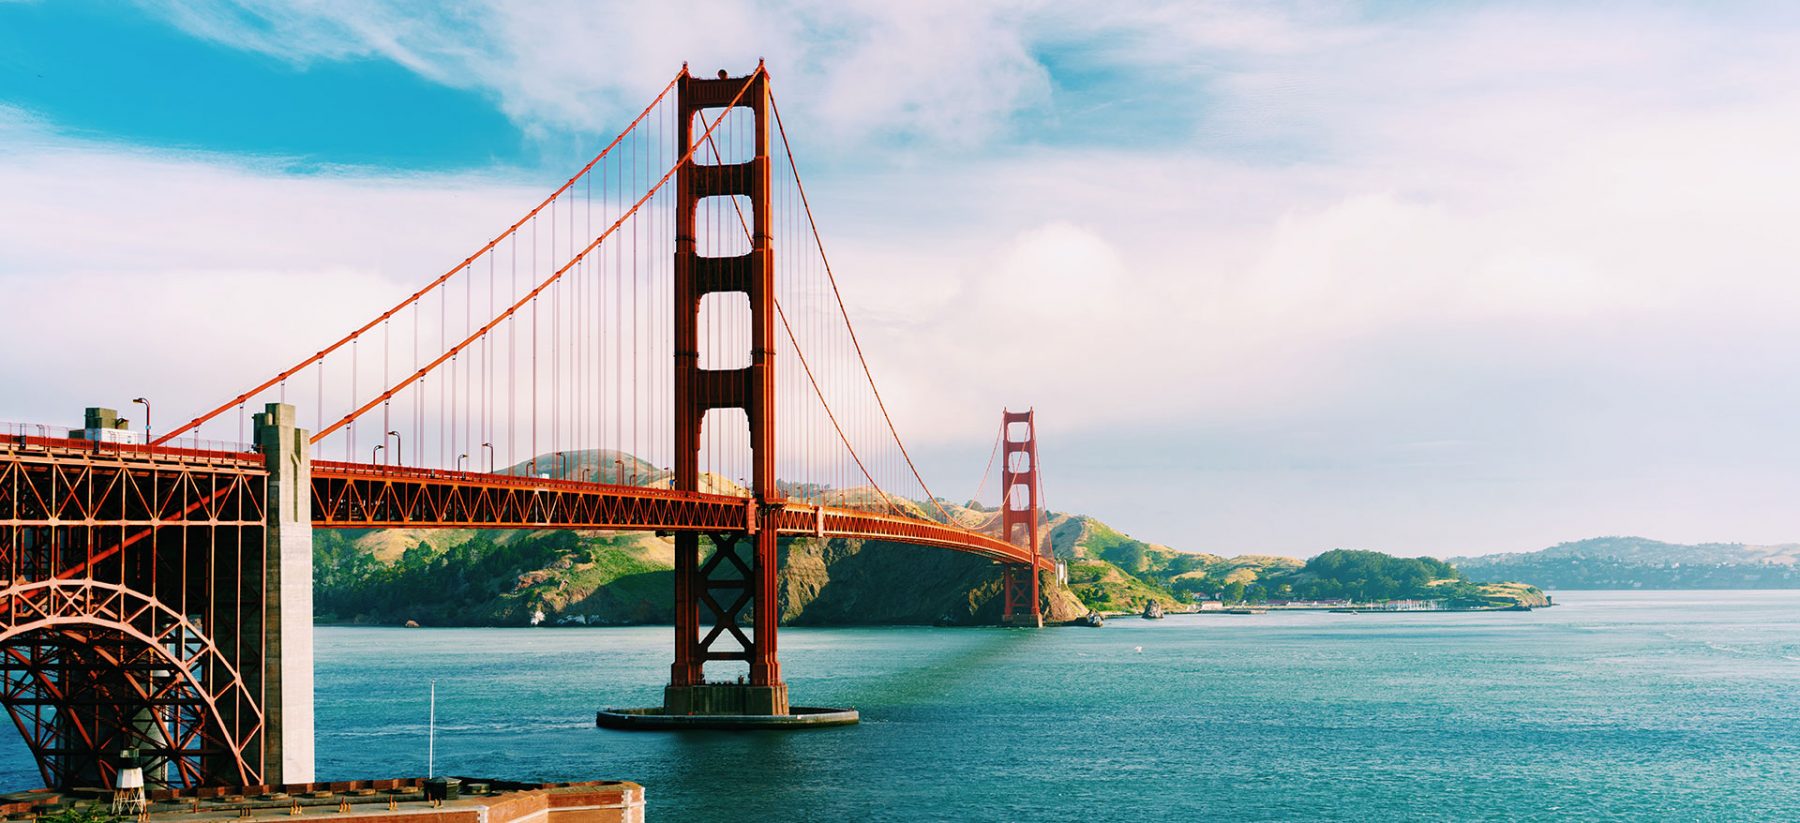 Image of Golden Gate Bridge in the Bay Area, California, USA - KALA's home for over 25 years.></p>
<hr>
<h3>Website Photography</h3>
Lifestyle photos from <a href=